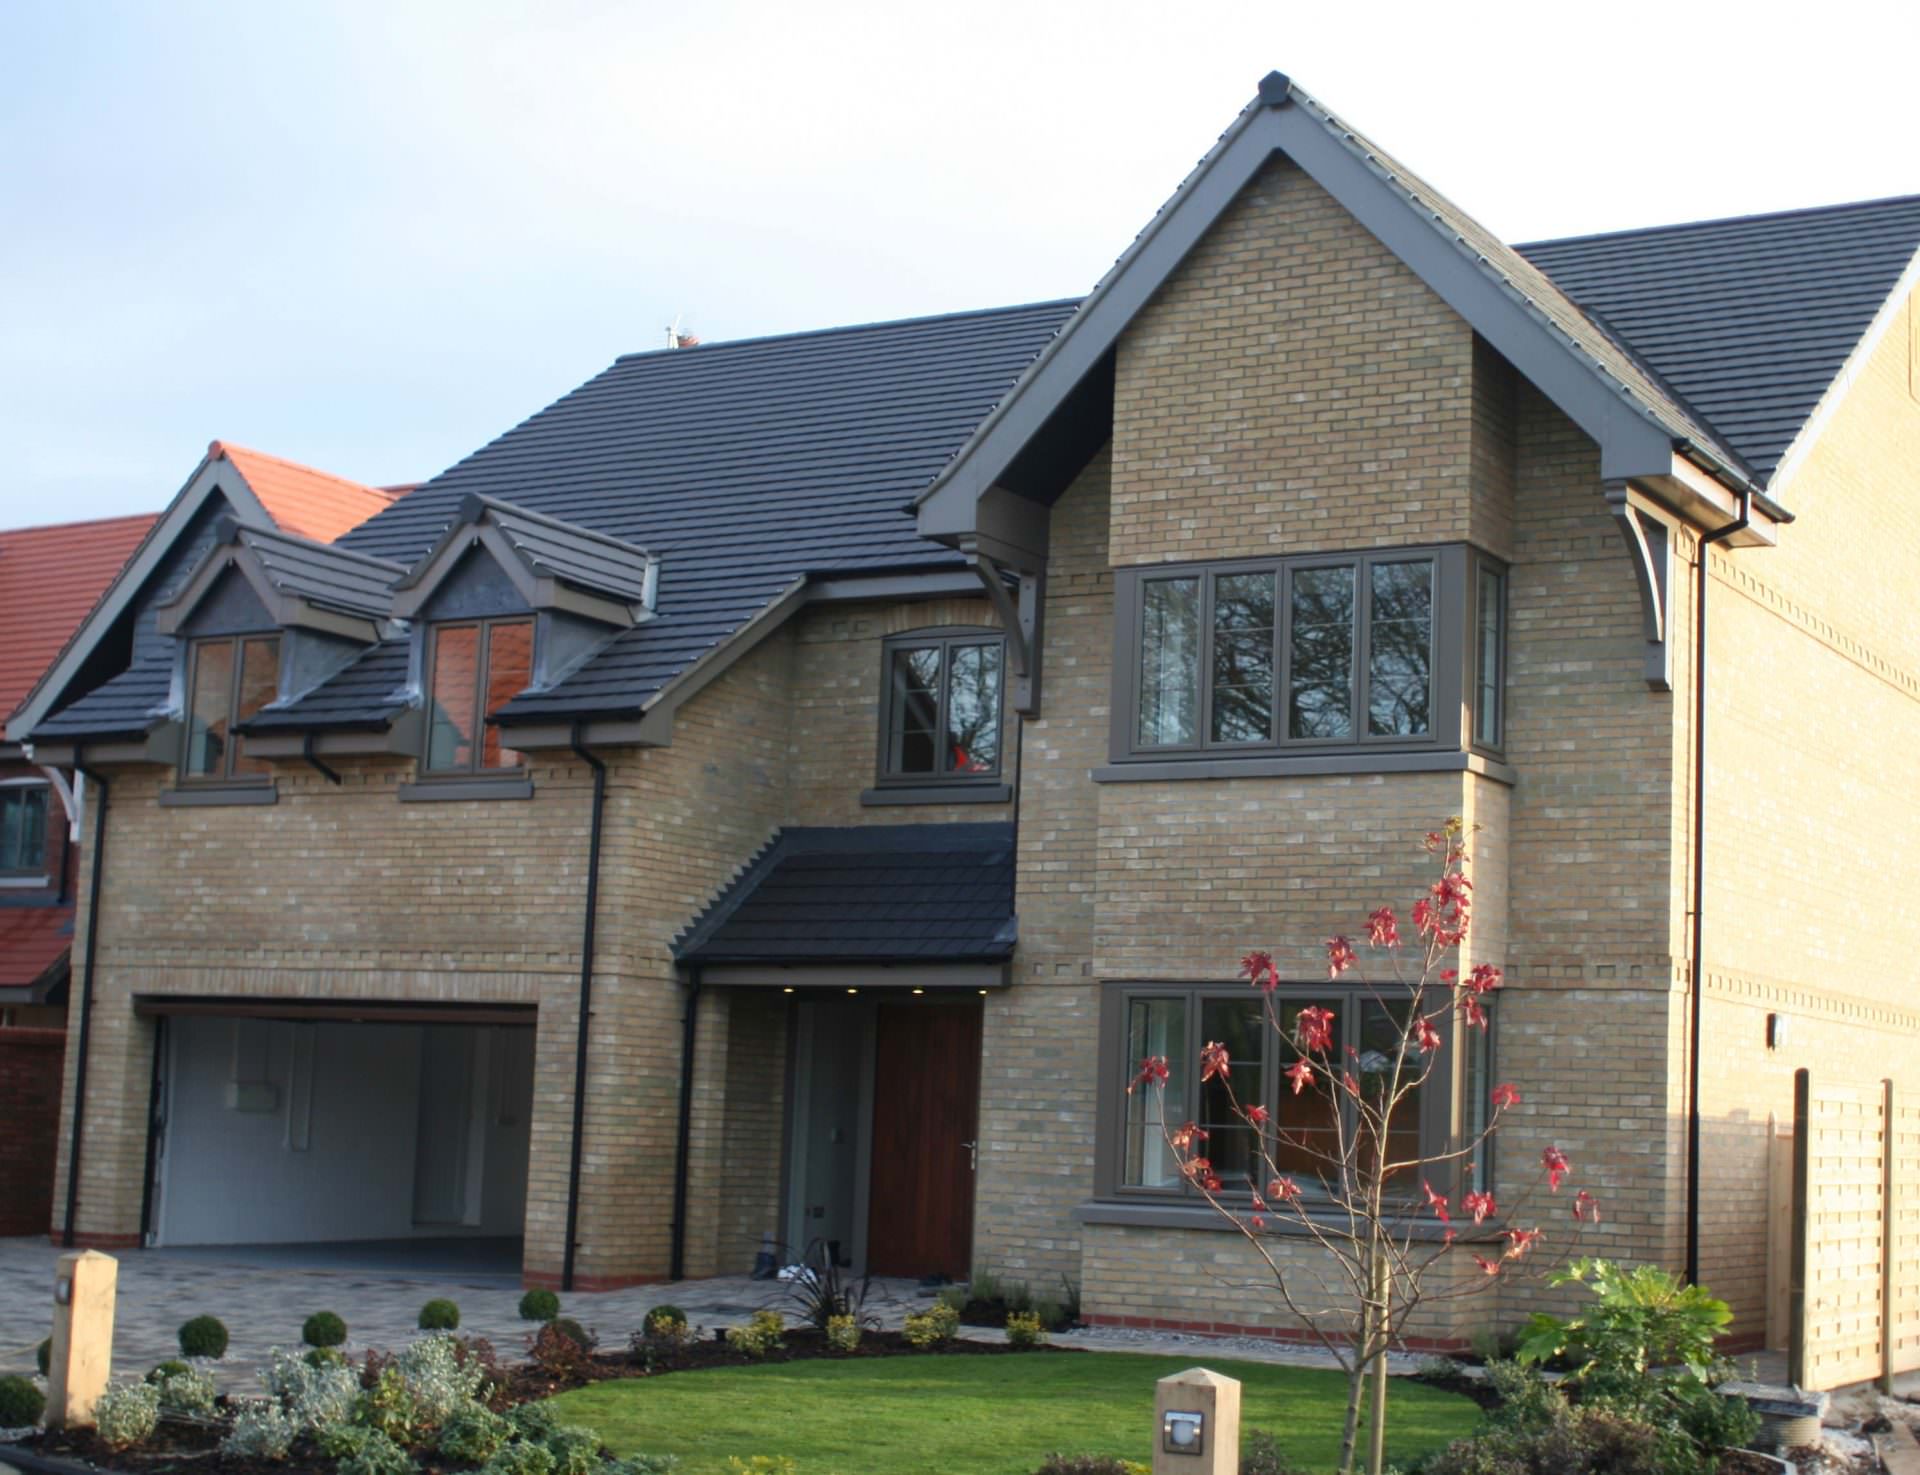 Home Improvements's Aluminium Windows of a house in Worcester, UK